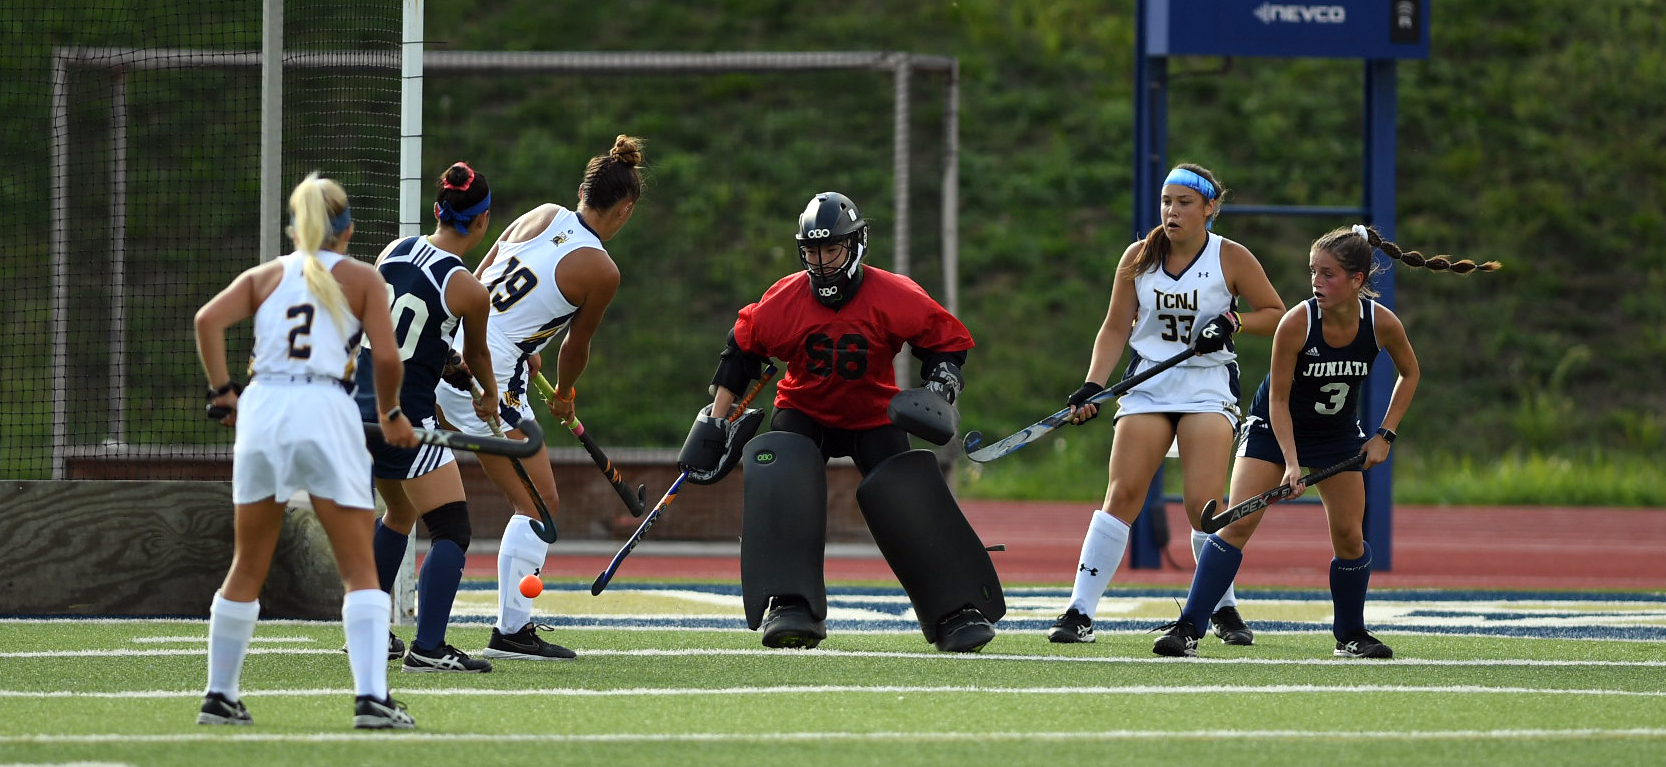 Nicole Piccioni made a career high 12 saves in goal in the 4-0 loss to TCNJ.